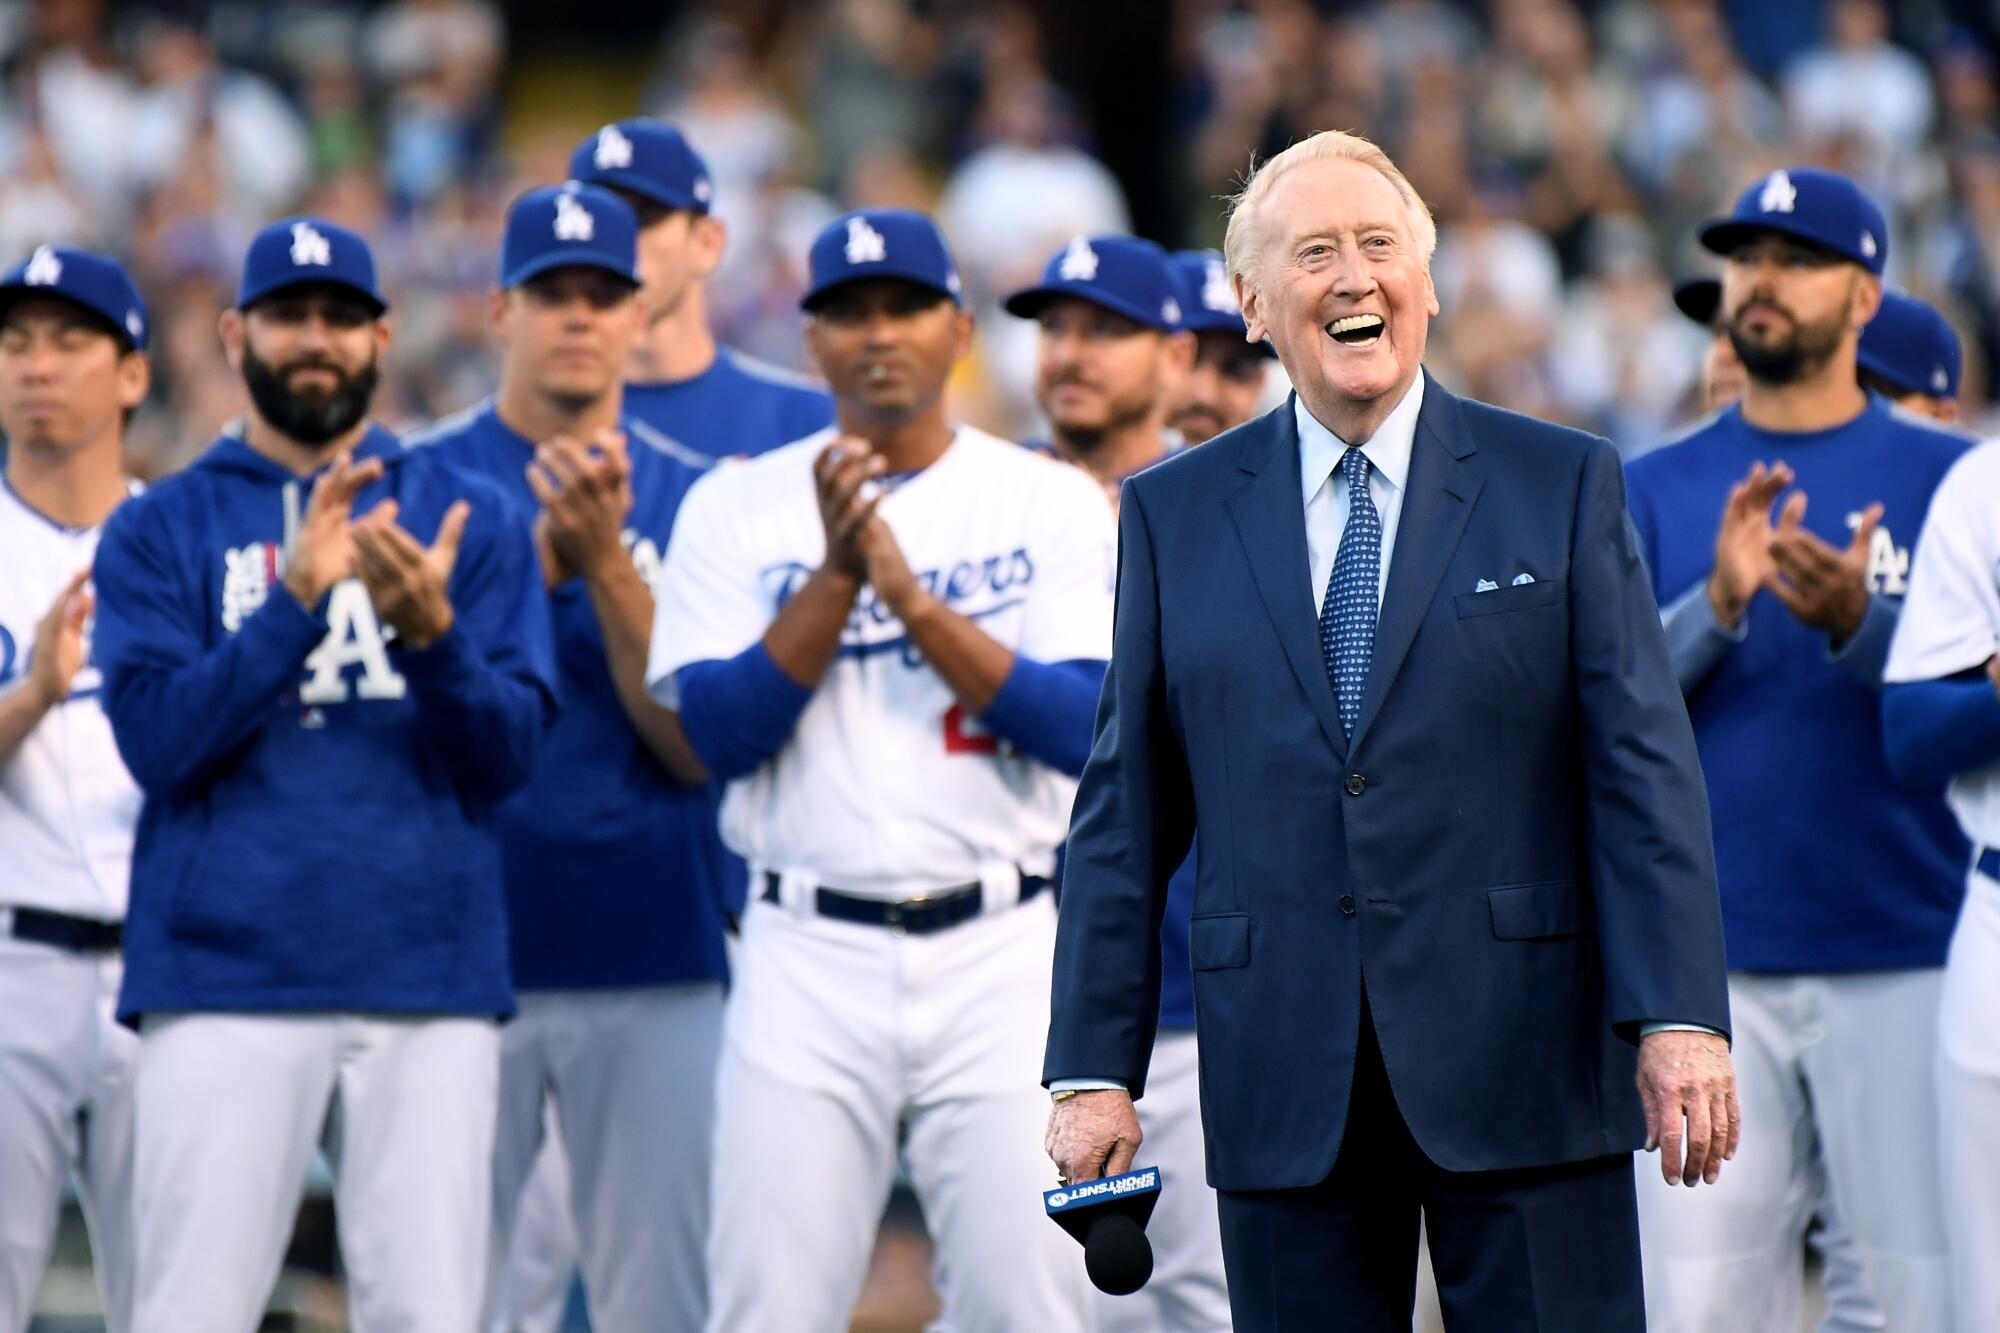 Dodgers broadcasting great Vin Scully smiles while being inducted into the Dodgers' Ring of Honor before a game.